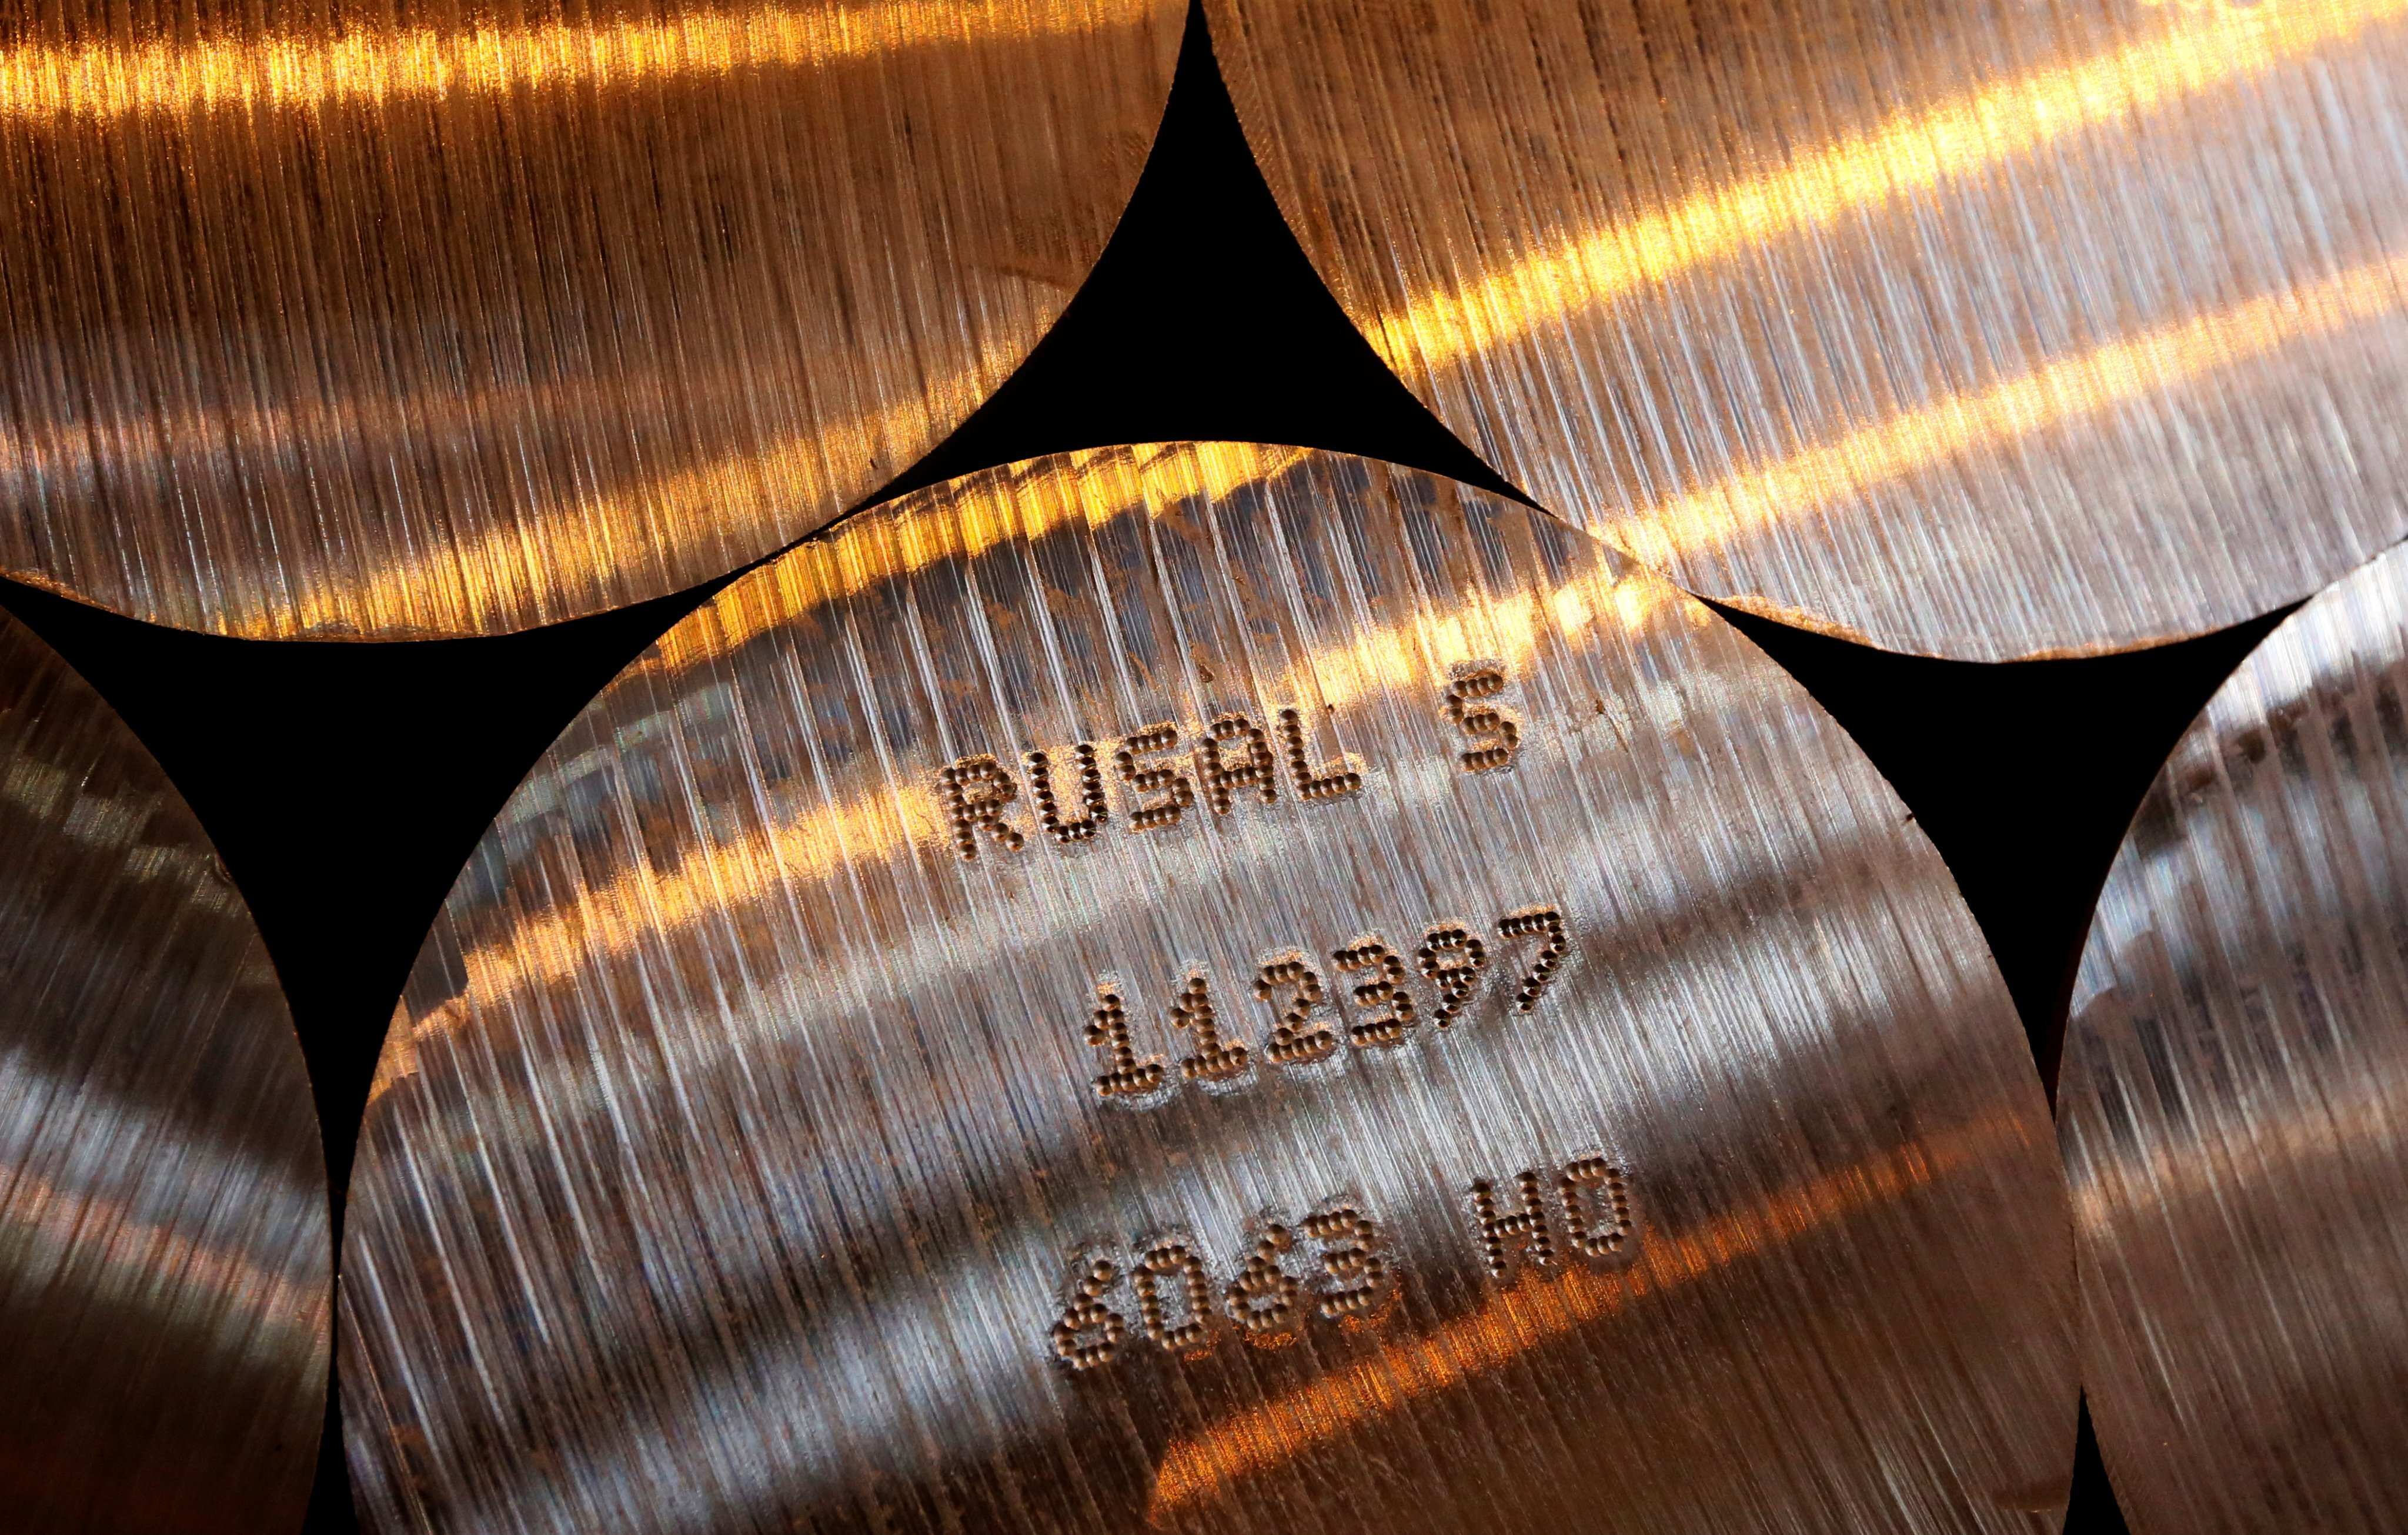 Marked cylindrical aluminium ingots are seen stored at Rusal’s Sayanogorsk aluminium smelter outside the Siberian town of Sayanogorsk in Russia, in this file photo from March 2017. Photo: Reuters